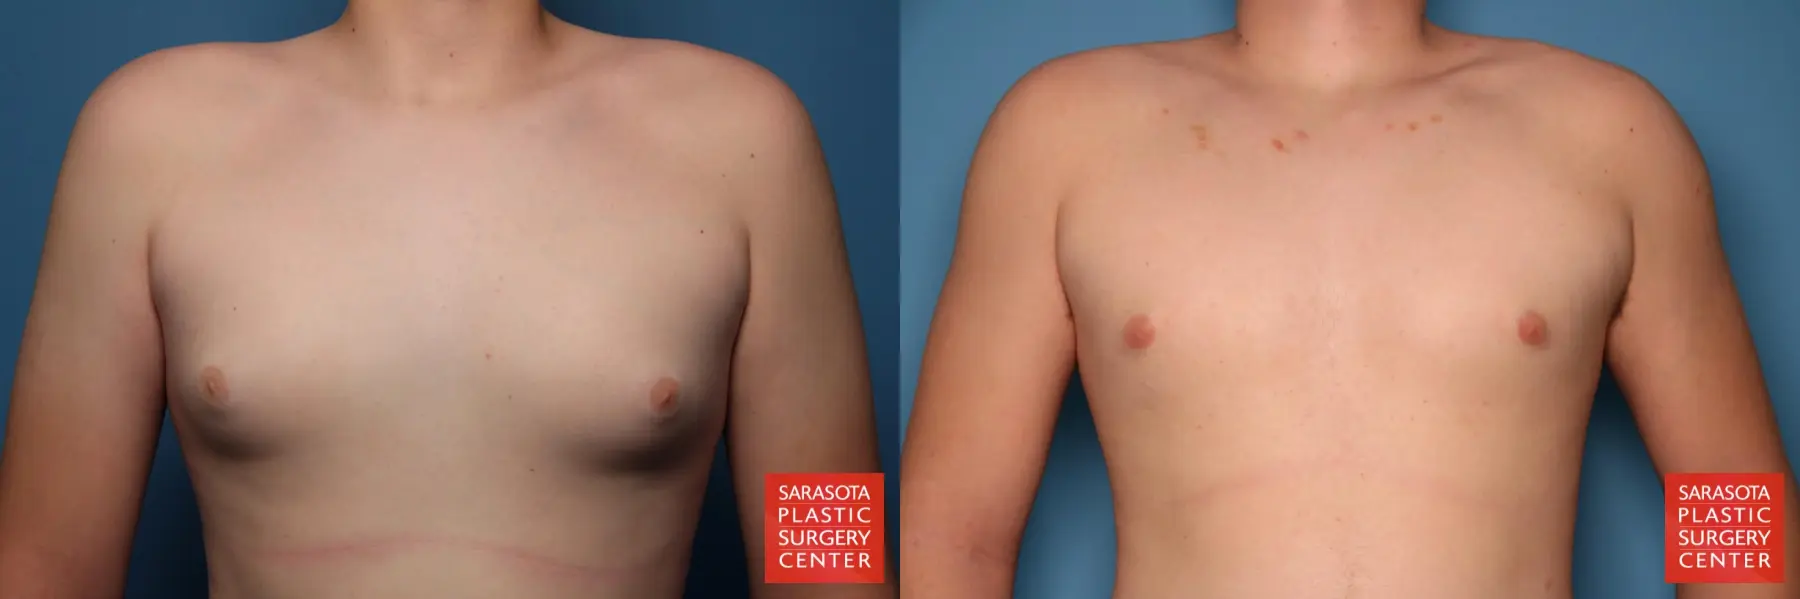 Gynecomastia: Patient 4 - Before and After 1